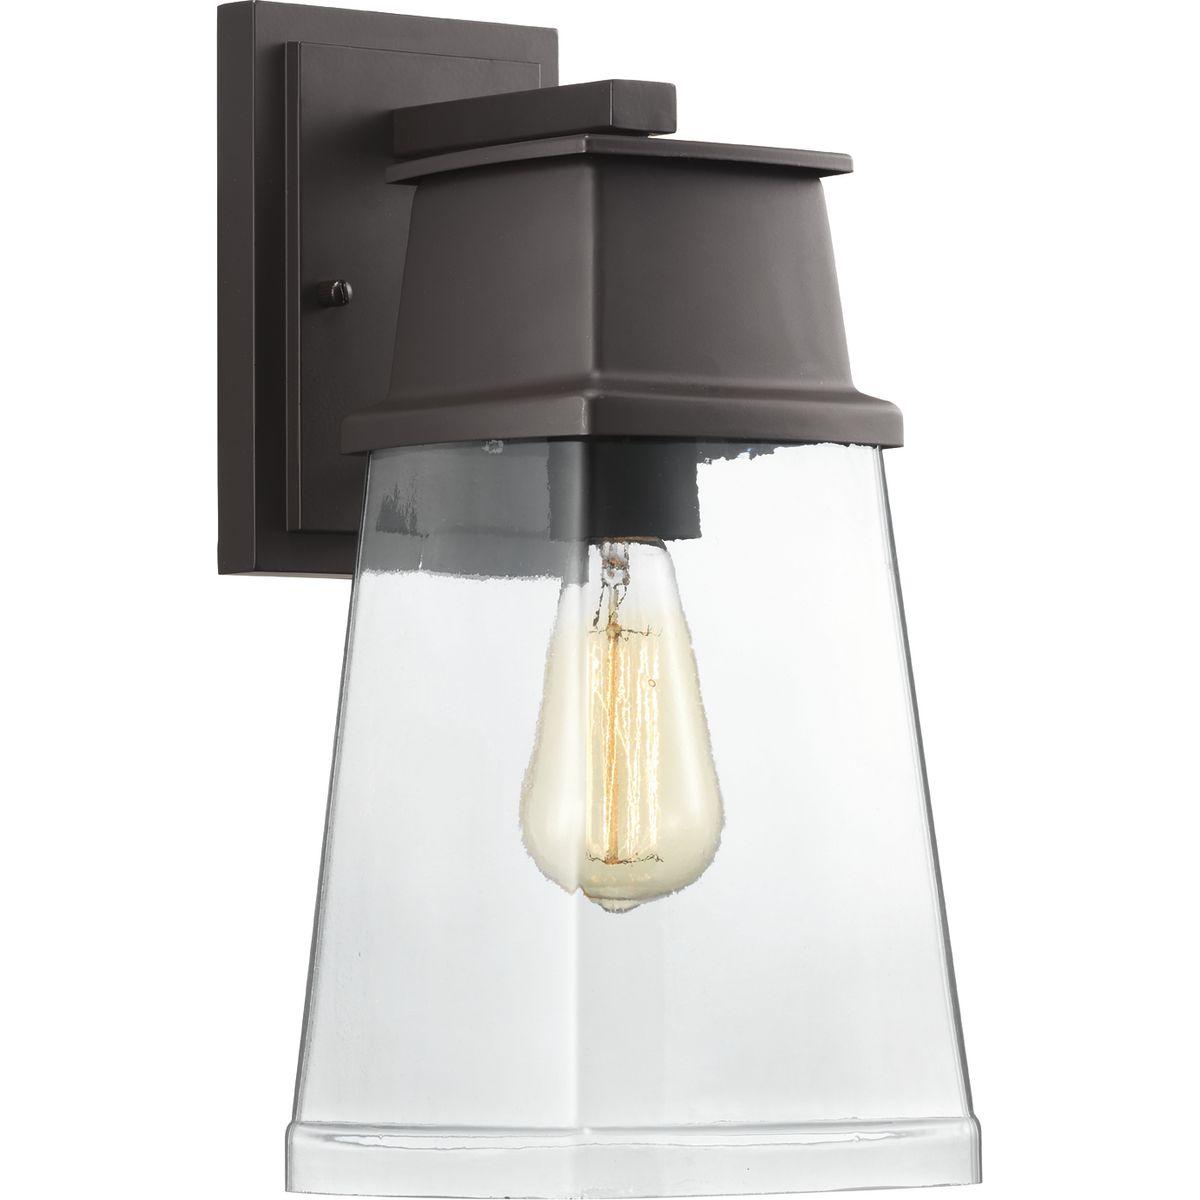 Hubbell P560100-129 The quiet confidence of the Craftsman-style Greene Ridge one-light medium wall lantern makes in an eye-catching fixture far exuding warm accent light in a dining or living area, in a foyer, or even an outdoor kitchen in Craftsman, rustic, and transitional